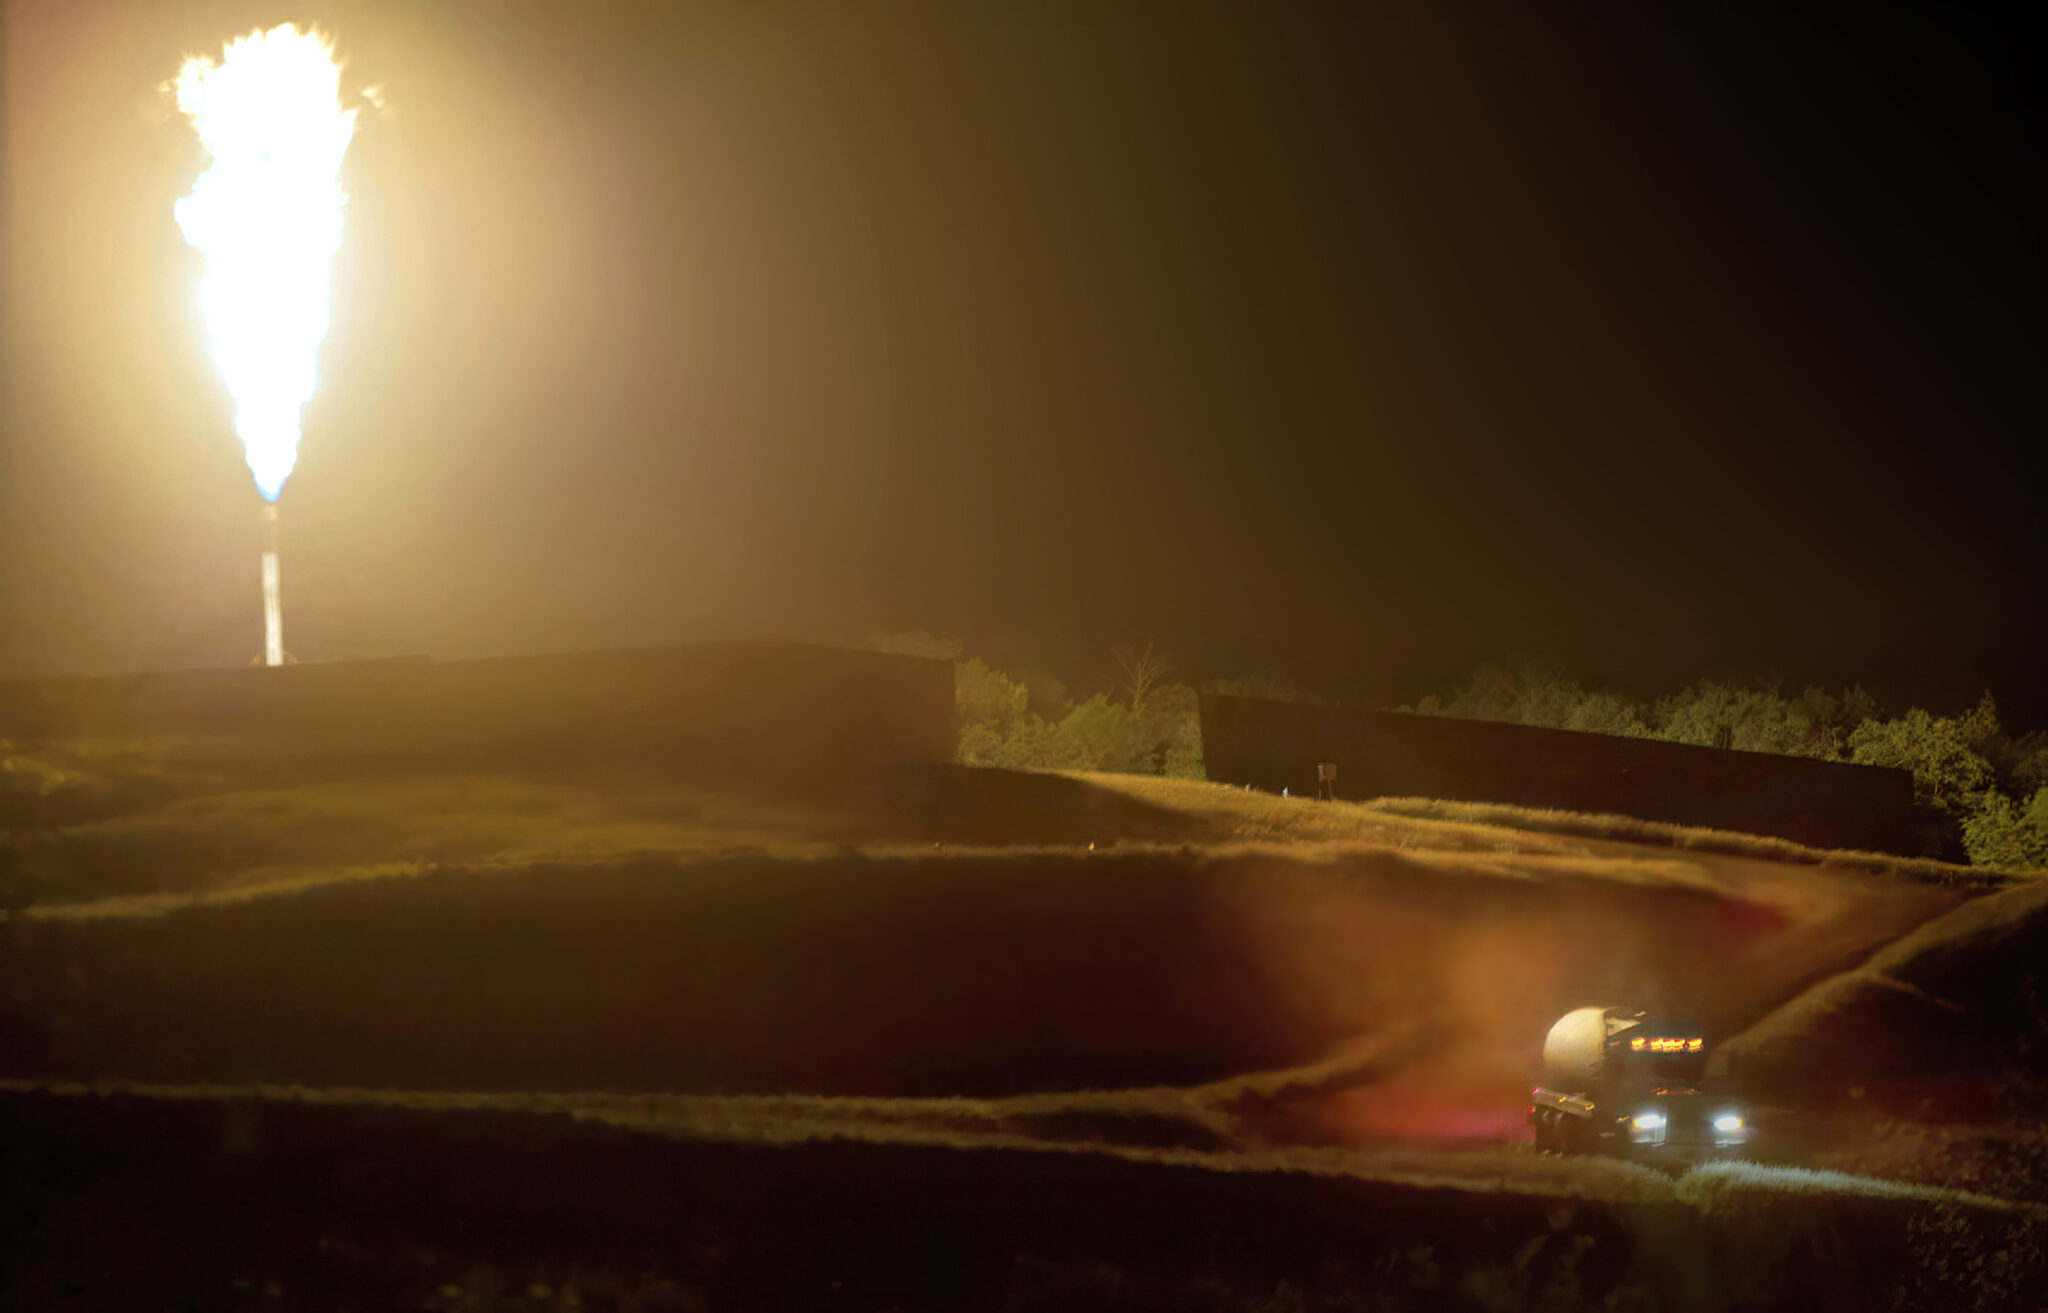 A truck filled with gas departs a newly completed gas well. The flare is burning because the infrastructure to transport the gas via pipelines was not yet complete. Credit: Scott Goldsmith